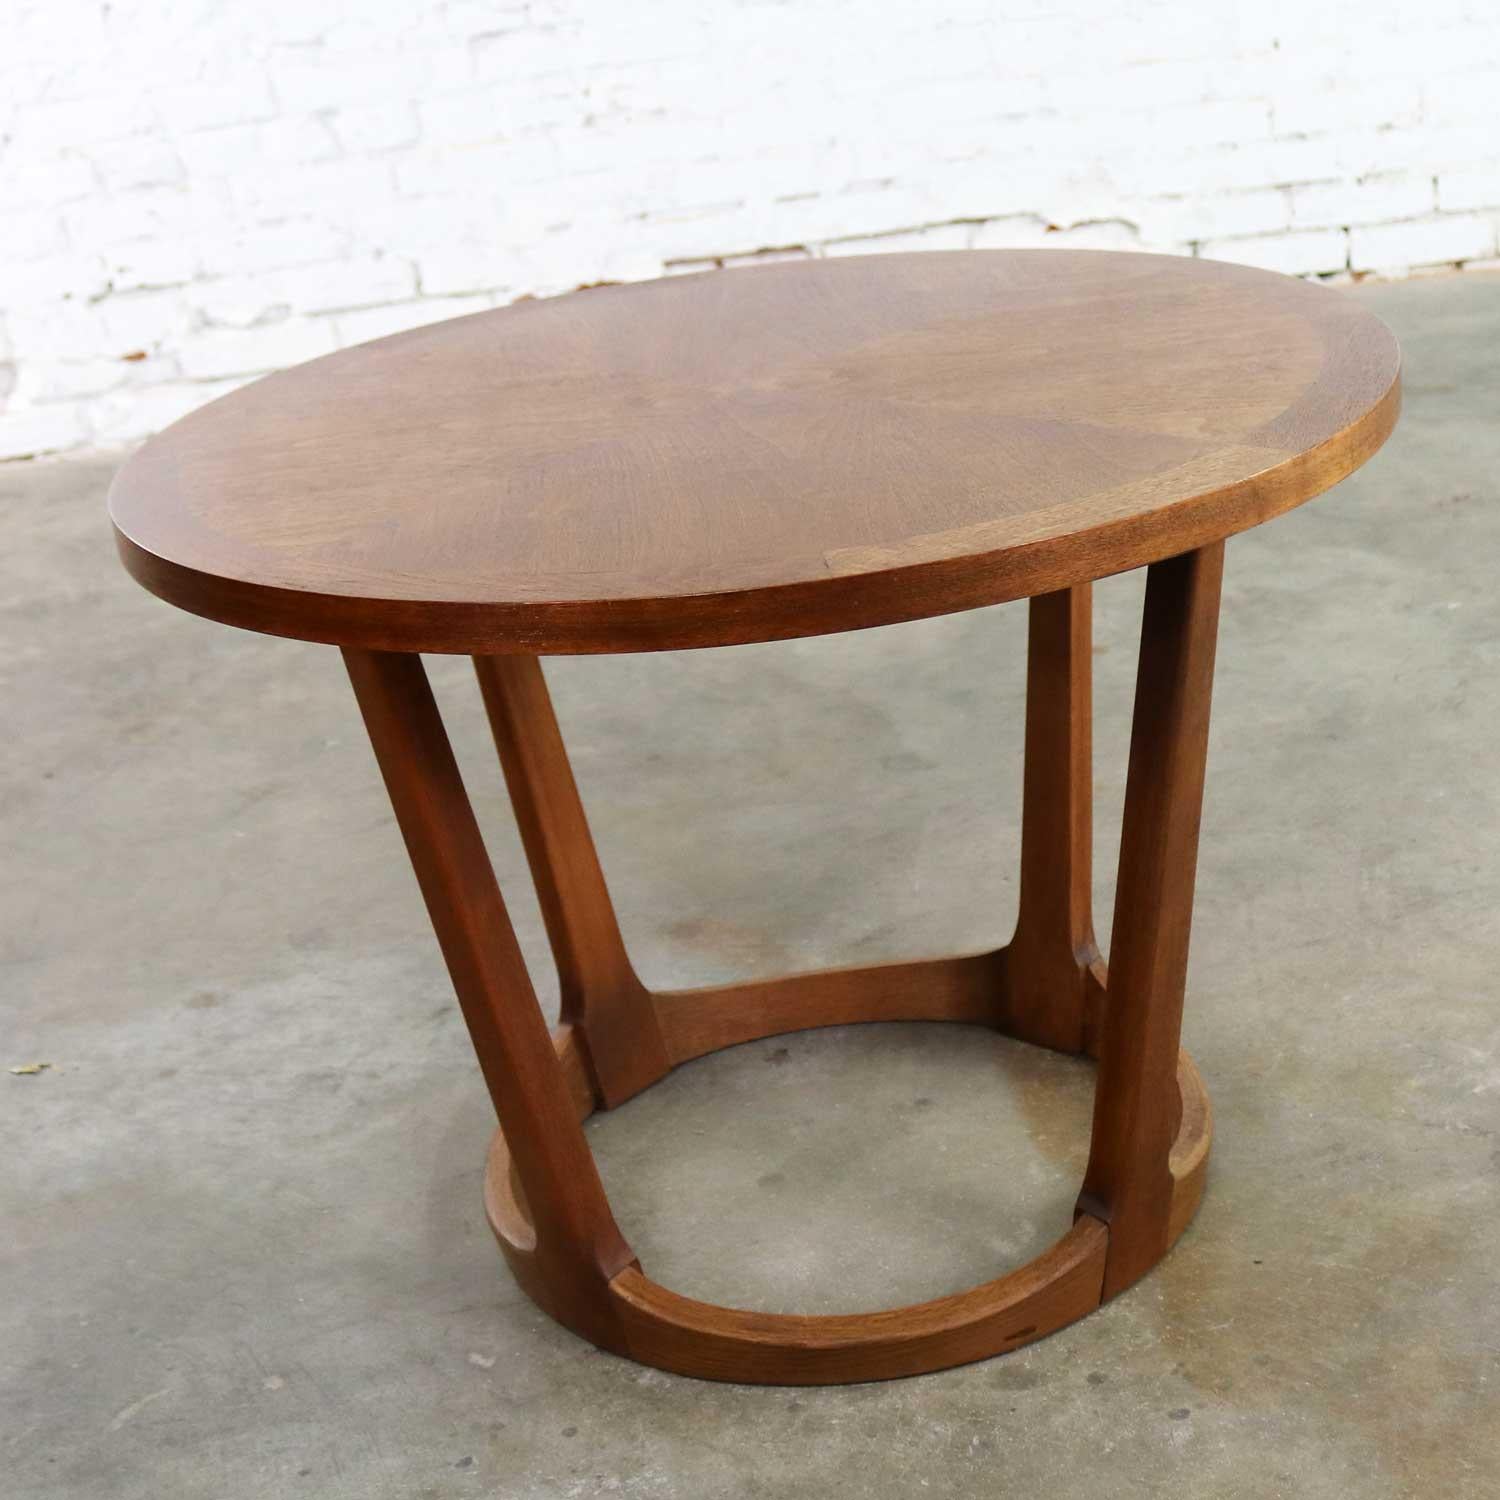 American Mid-Century Modern Lane Round Drum End Table 997-22 from the Rhythm Collection